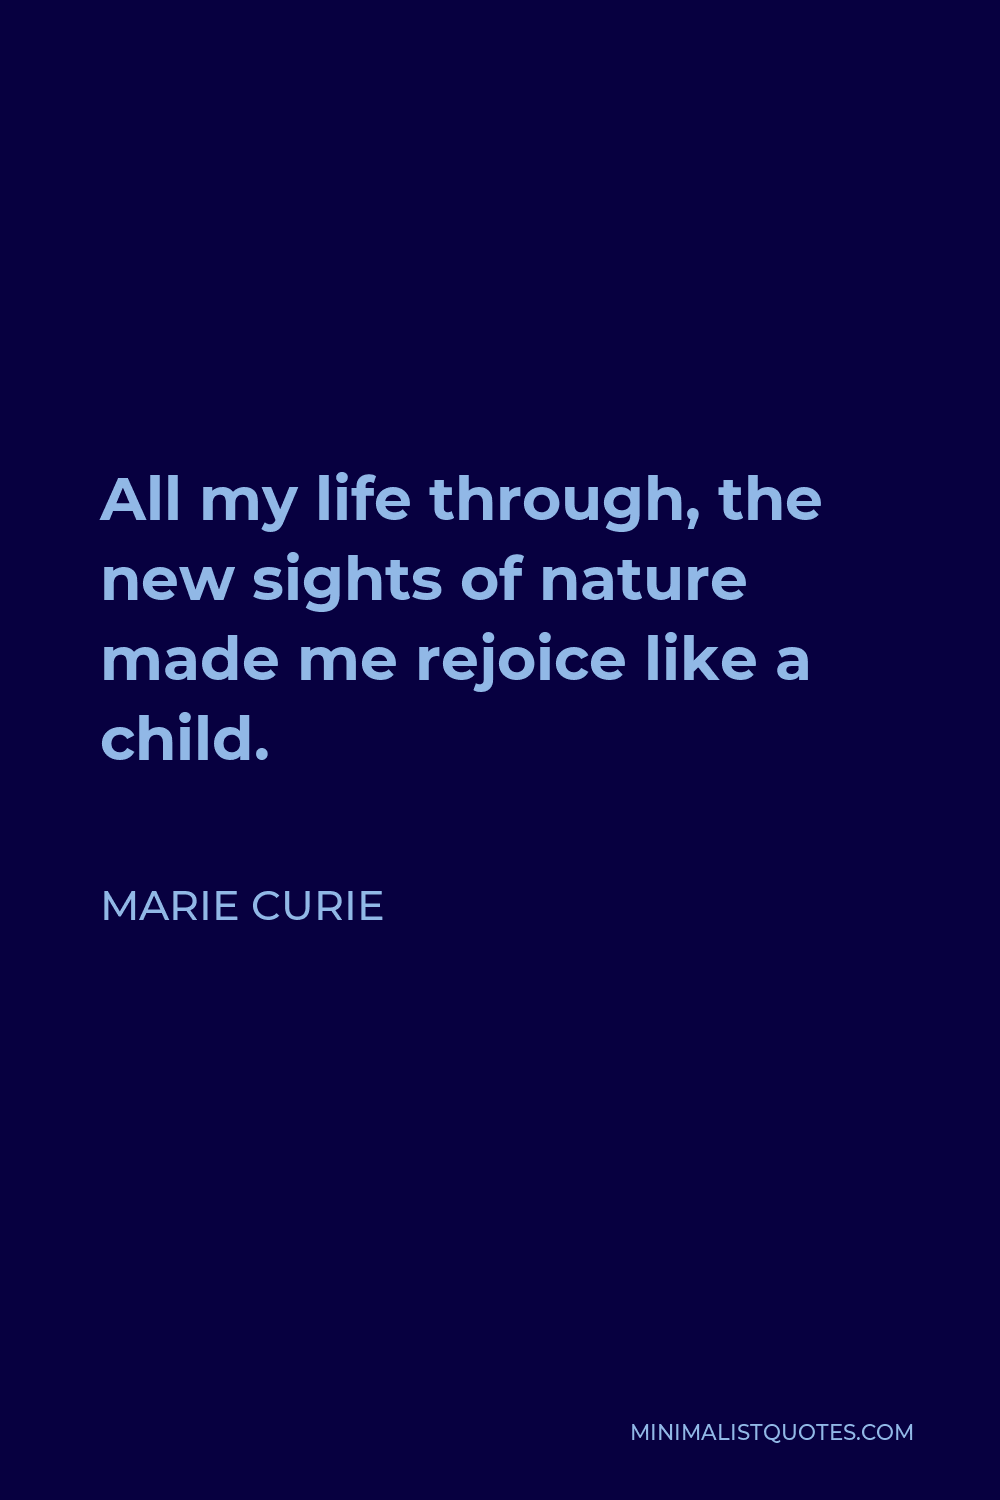 Marie Curie Quote - All my life through, the new sights of nature made me rejoice like a child.